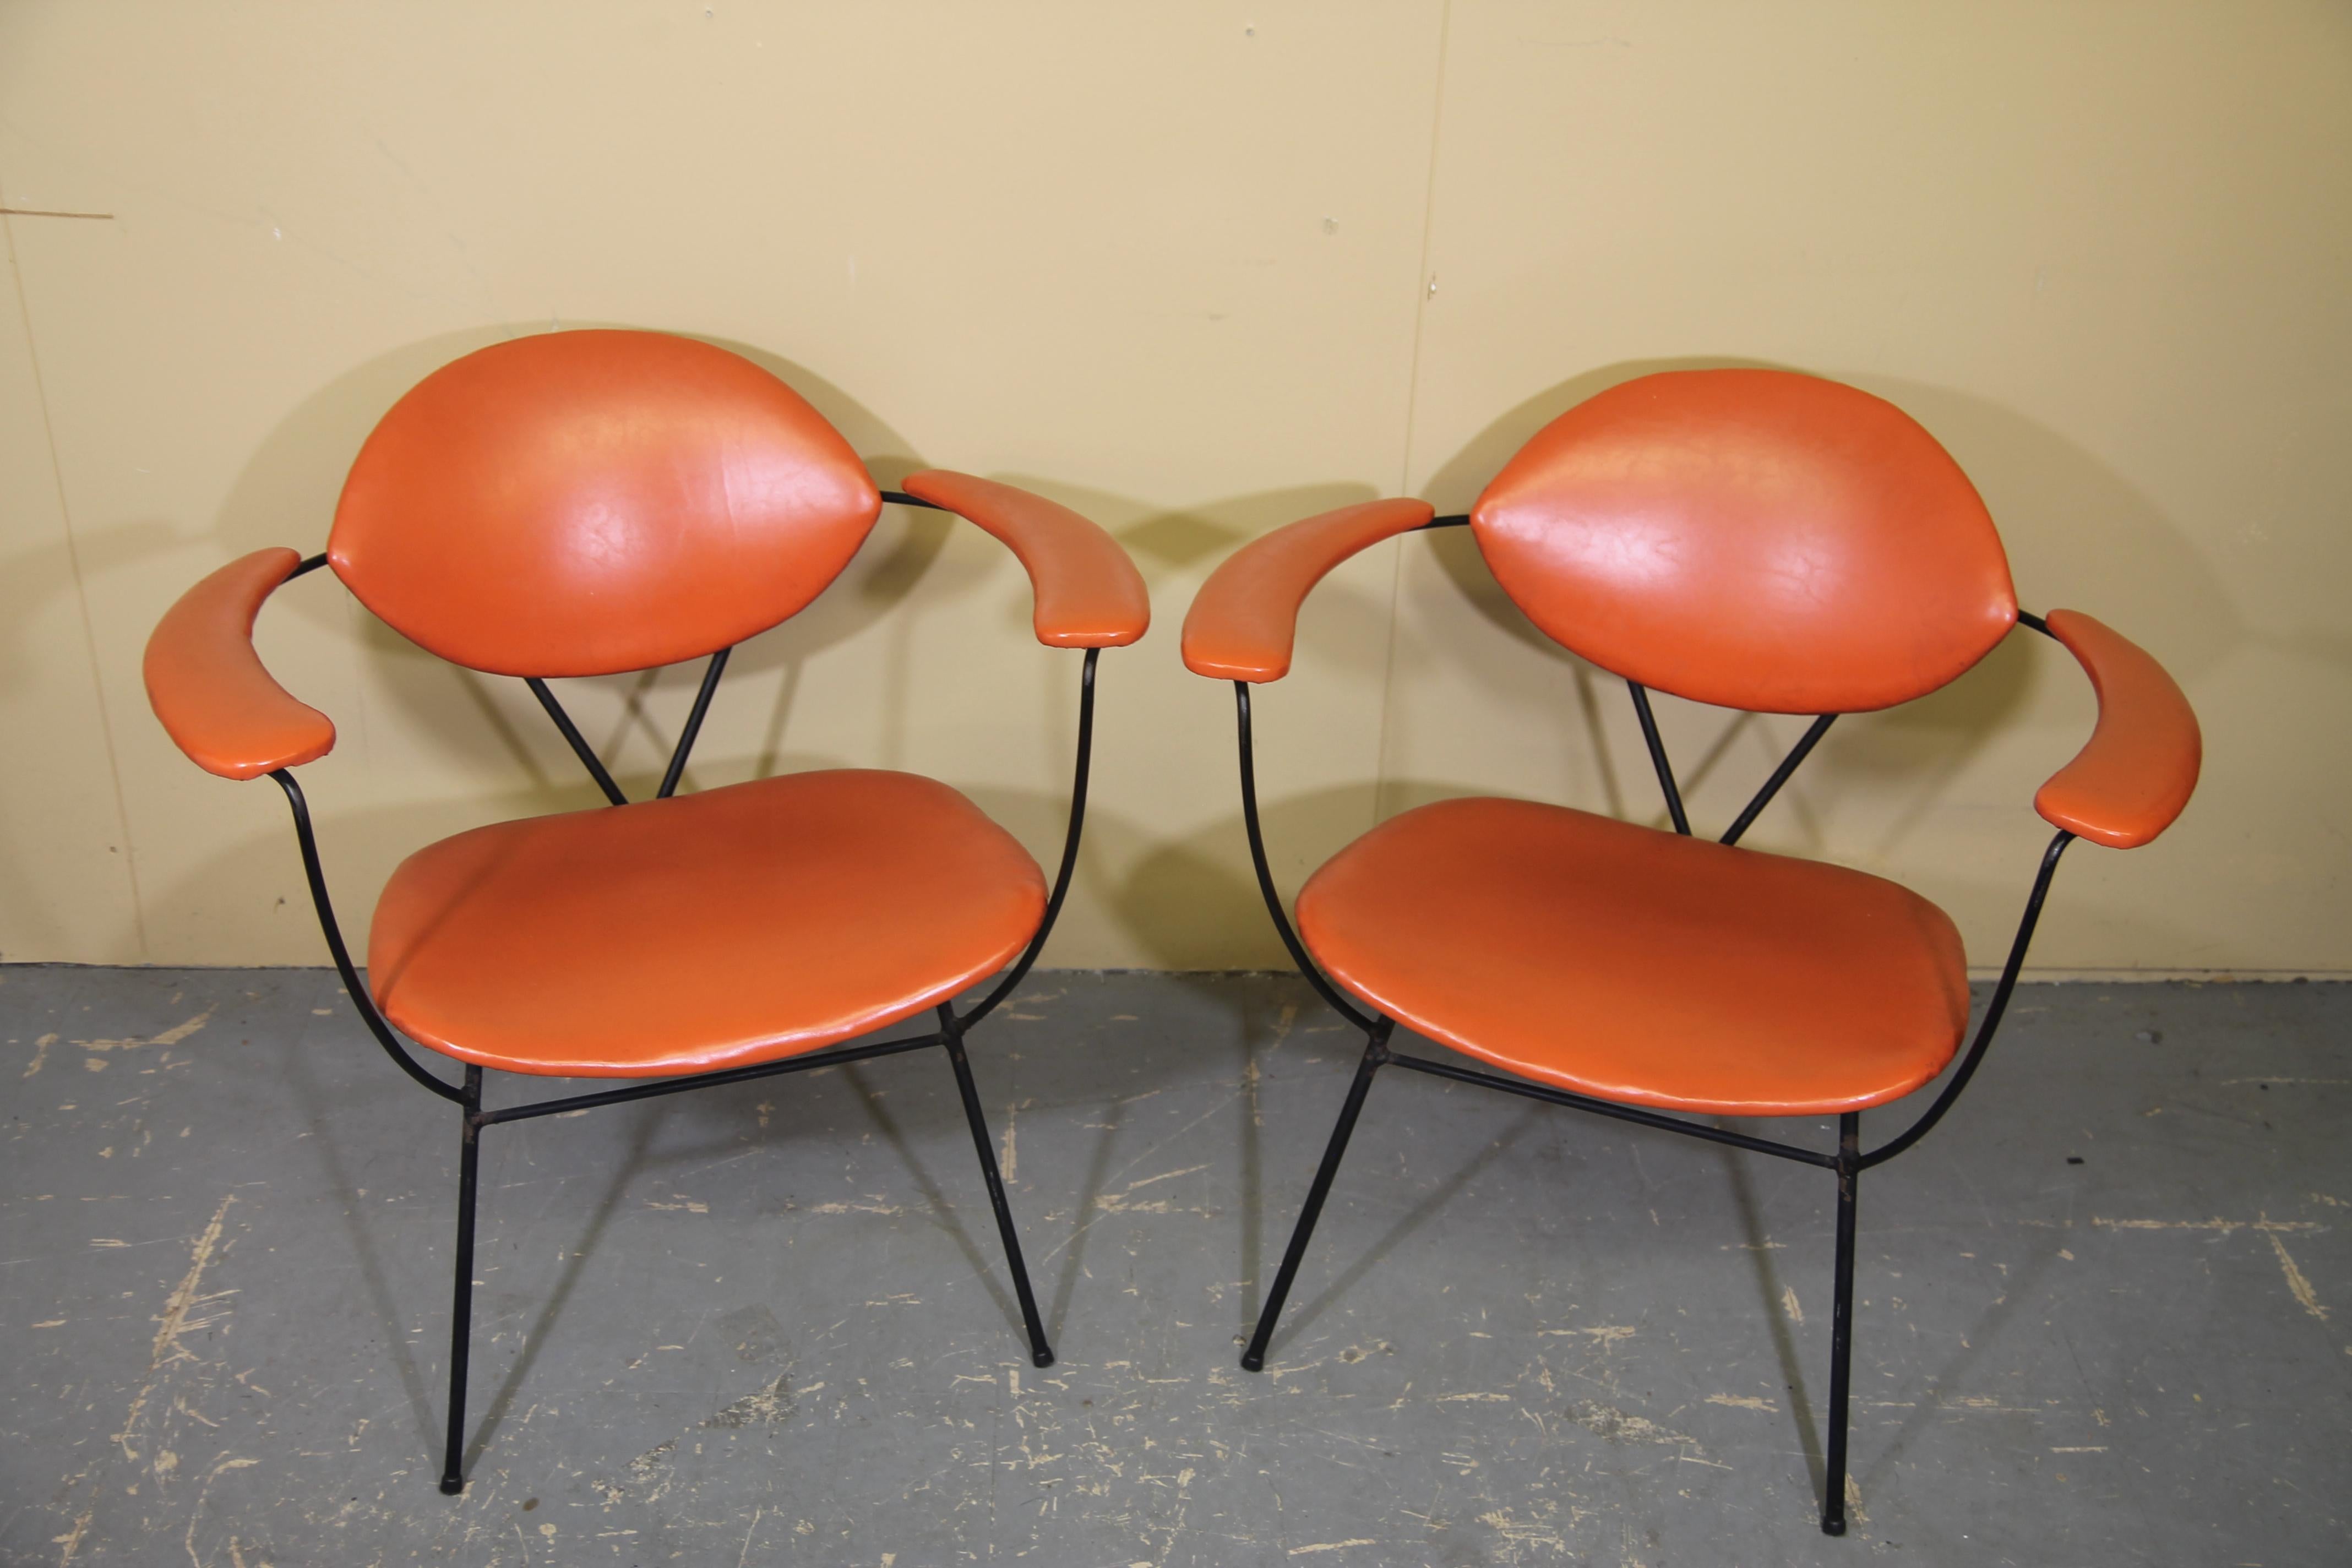 Rare 1950s lounge chair designed by Joseph Cicchelli for Reilly-Wolff of Astoria NY. These all original chairs are in great vintage condition. Chairs retain their original tags. Very comfortable and will look amazing in your home or office.